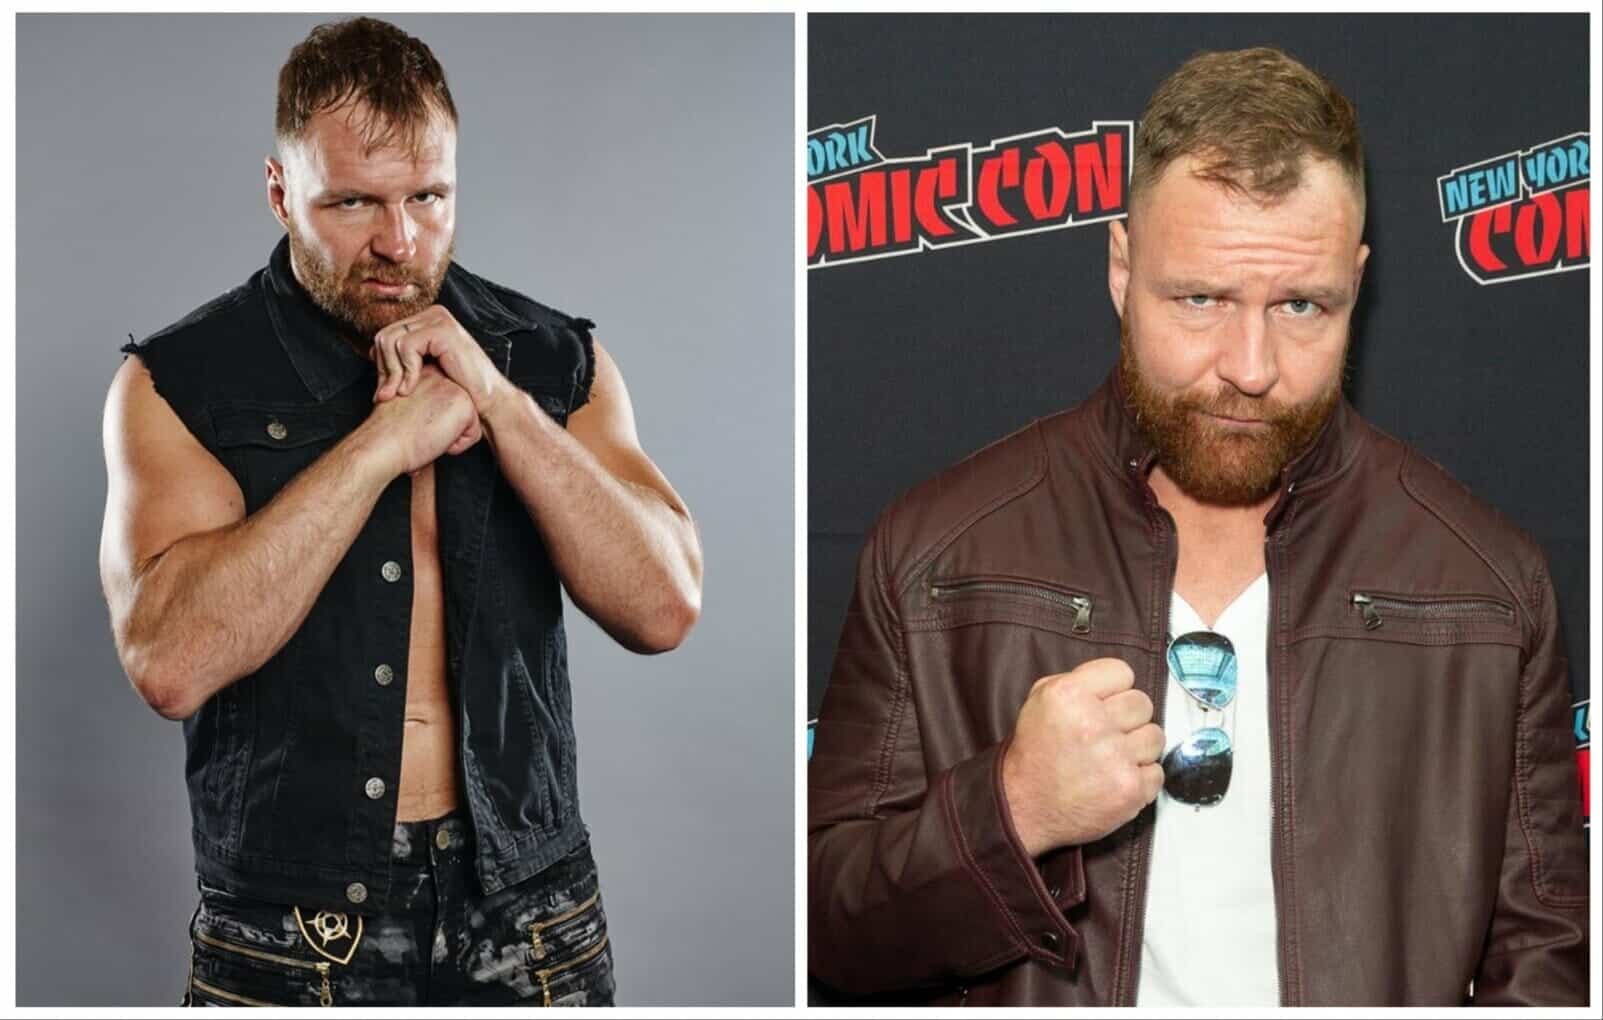 What is Jon Moxley's Net Worth as of 2023?